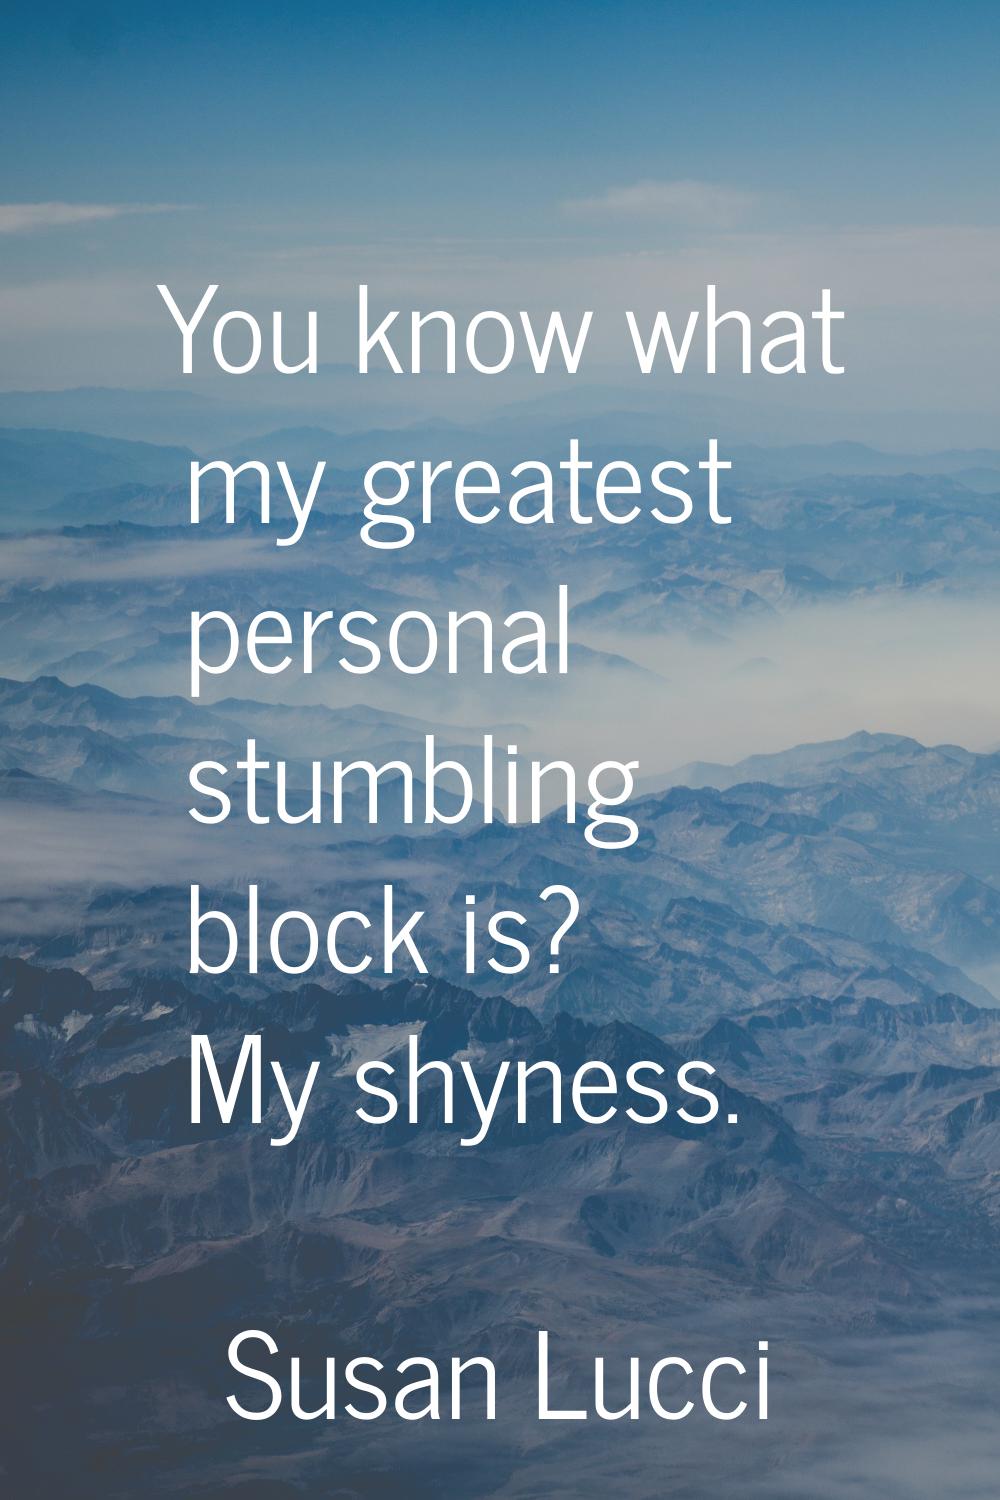 You know what my greatest personal stumbling block is? My shyness.